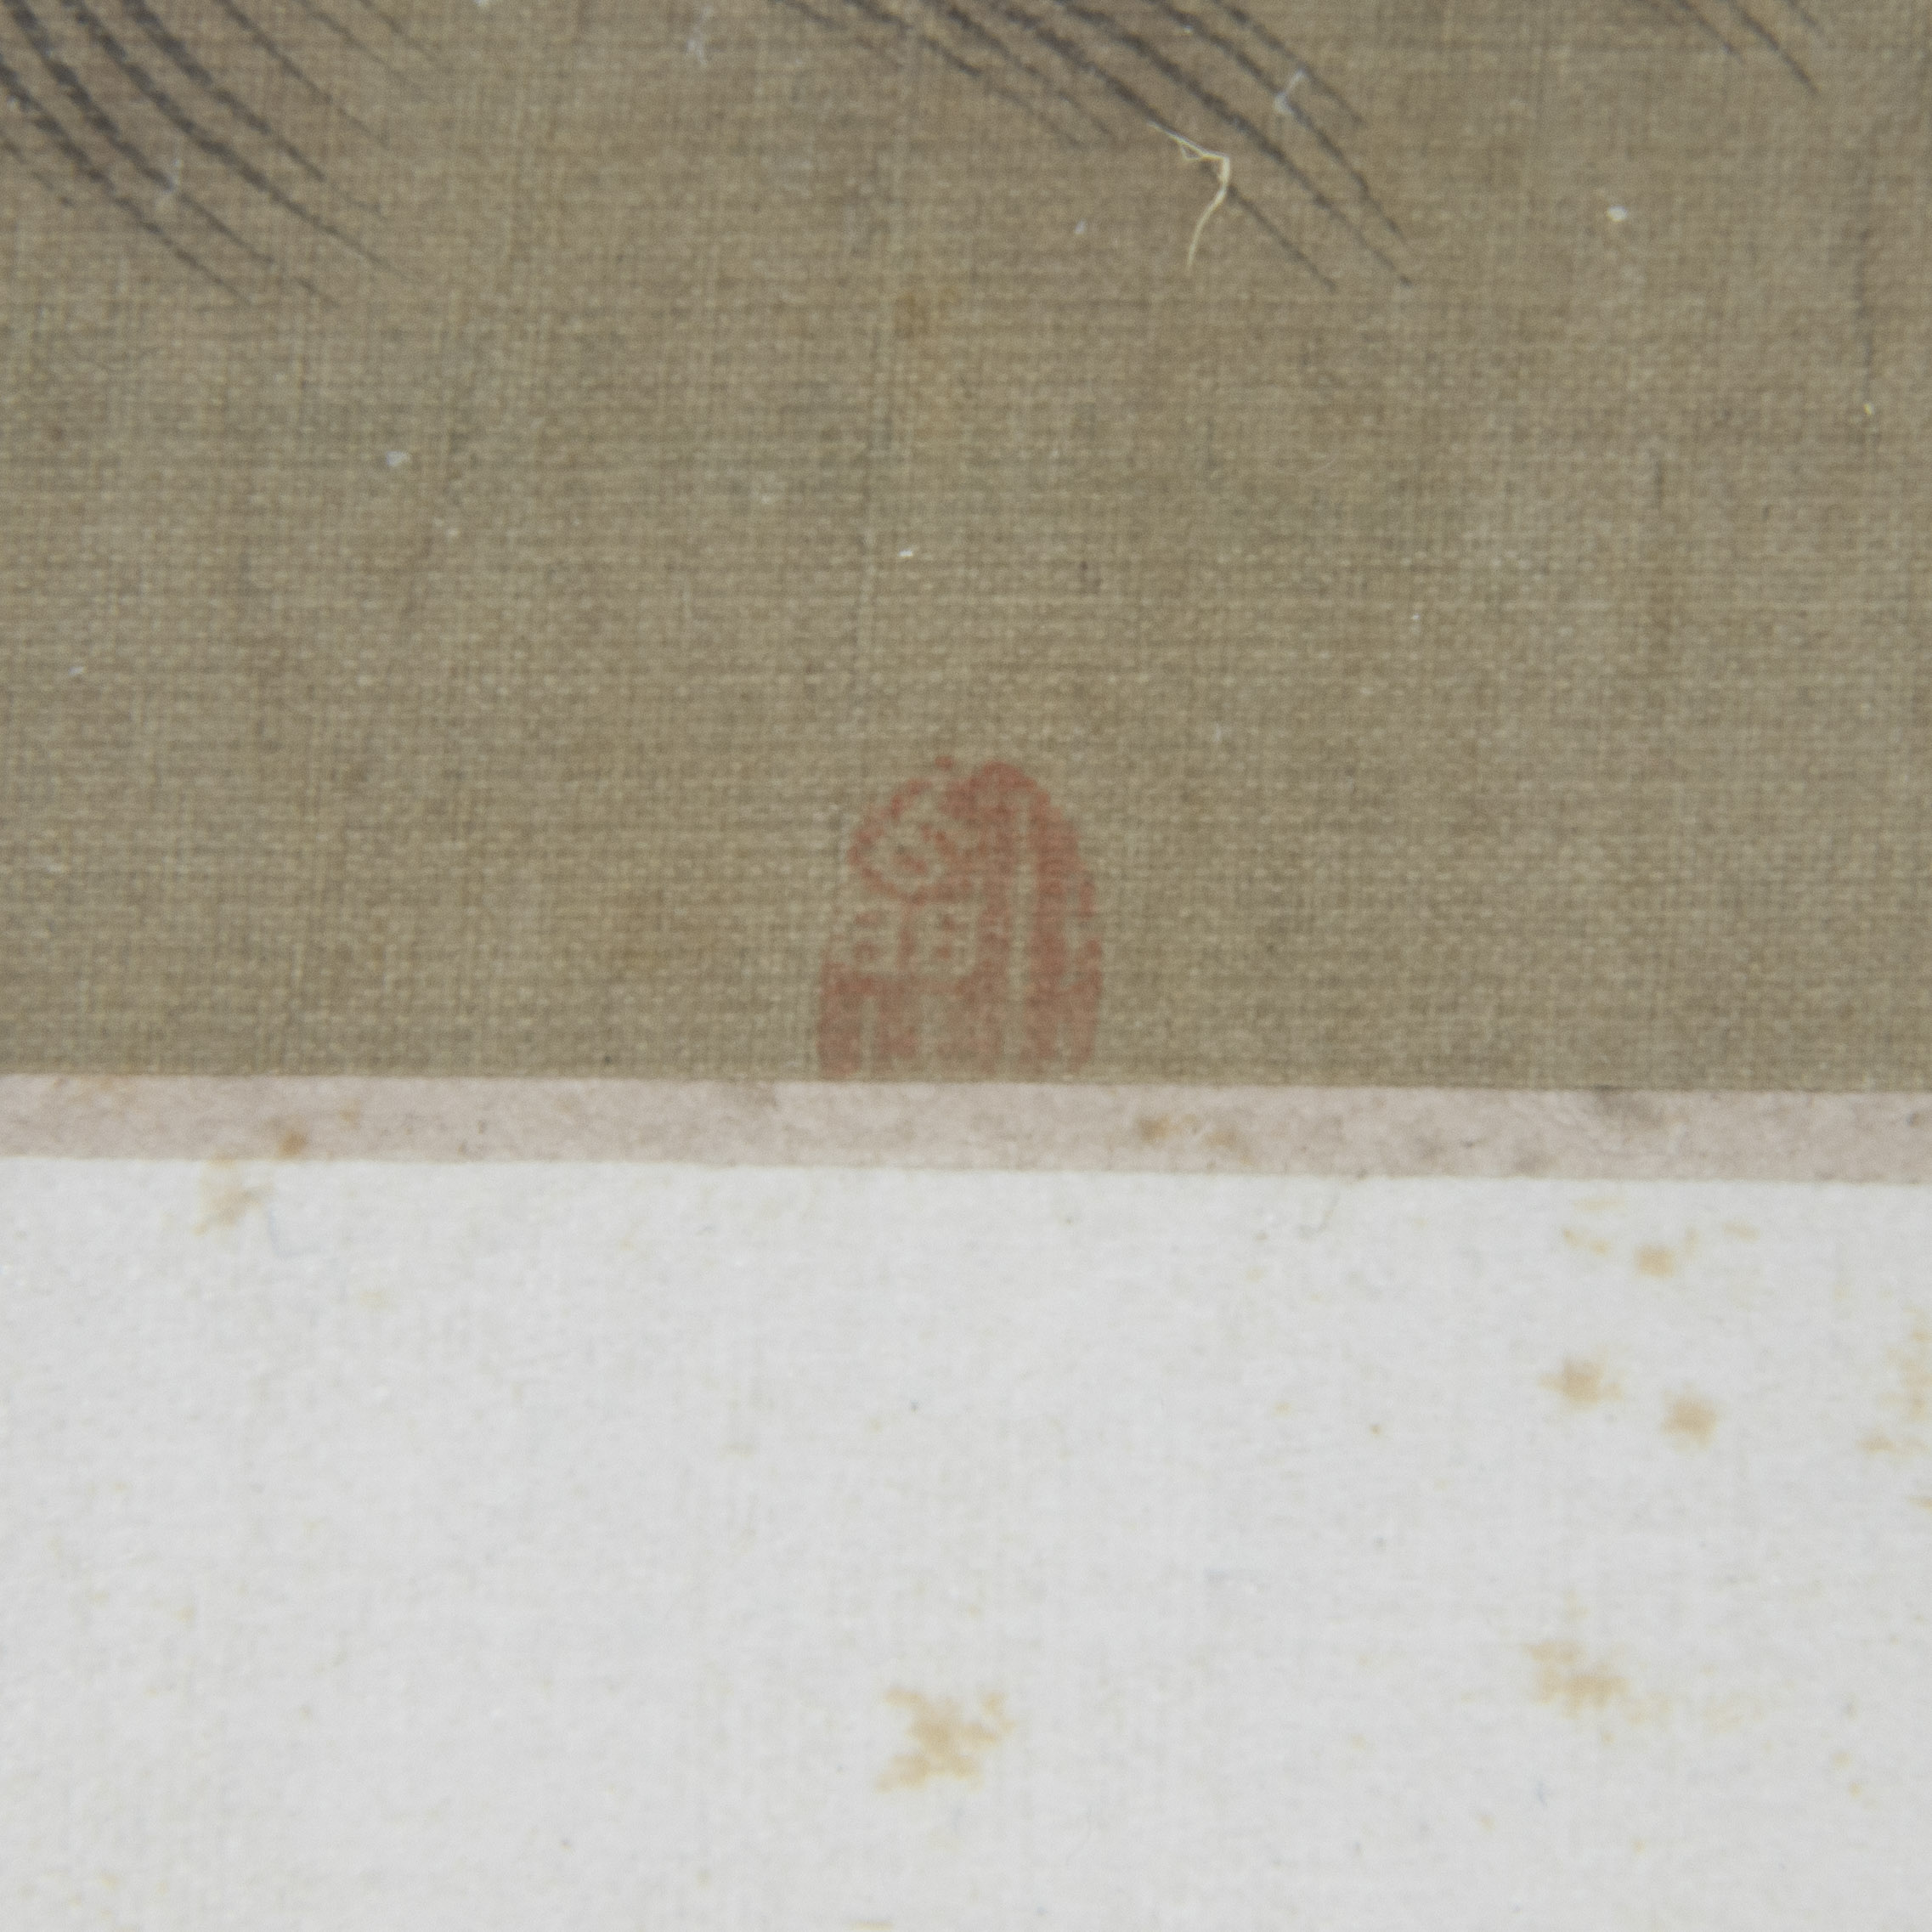 Set of 13 Chinese coloured drawings on silk, 19th century, some are signed - Image 17 of 17